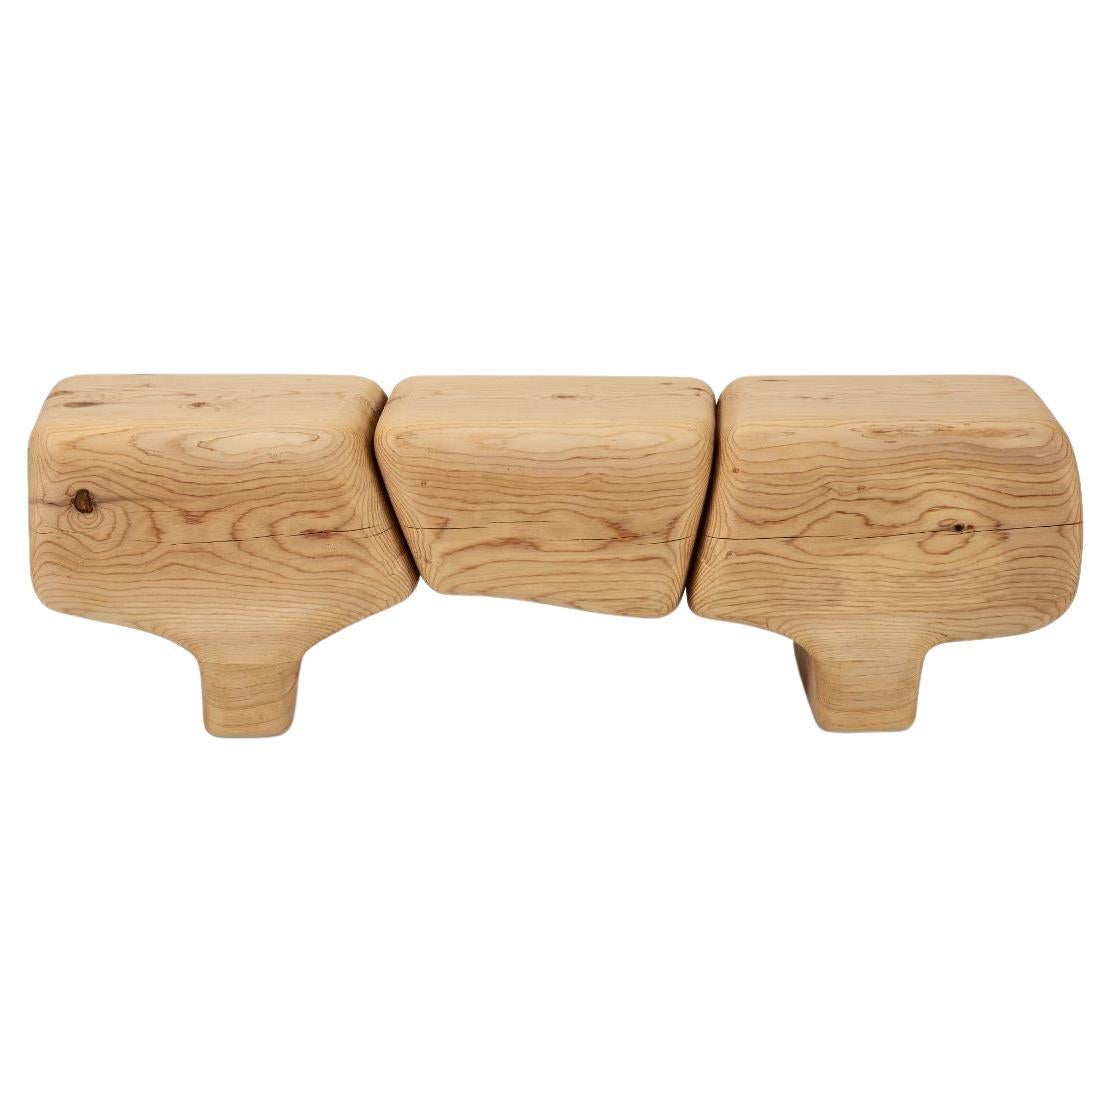 Aromatique Cedre Sculptural Bench by Contemporary Ecowood For Sale